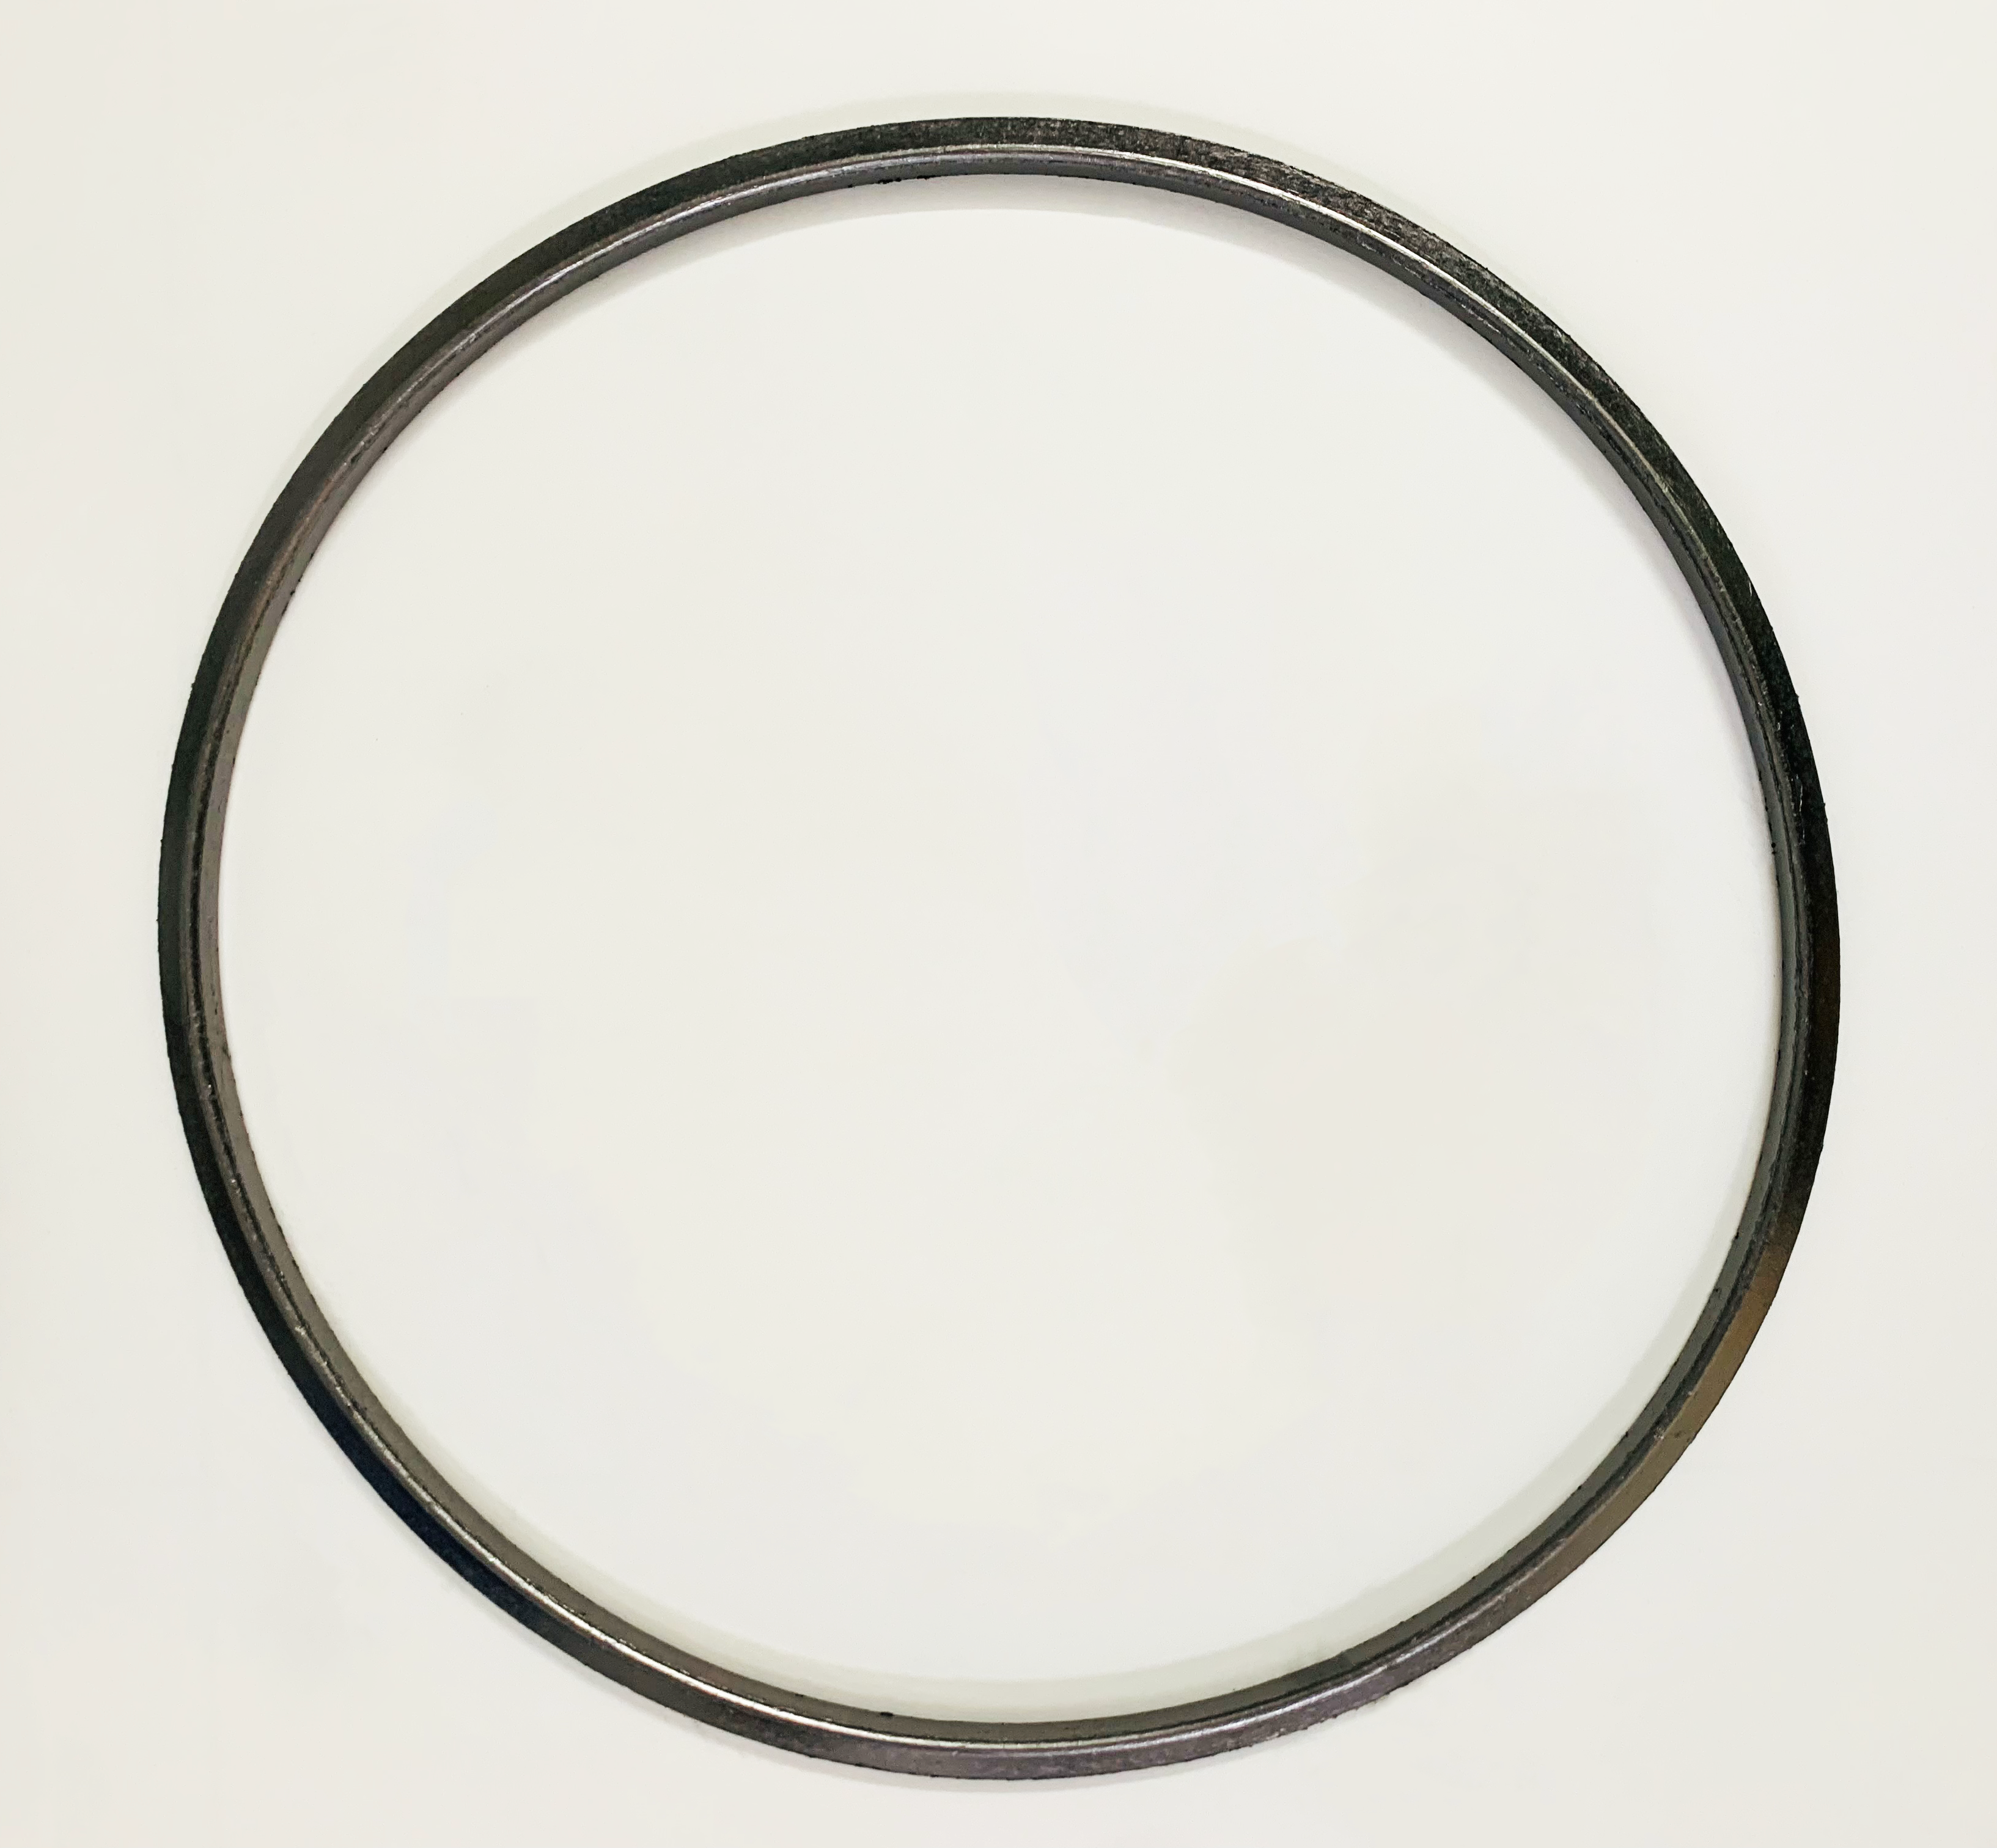 Veefit Clamp and Gasket Kit for DAF Diesel Engine Exhaust Purification System 1904020 2325403